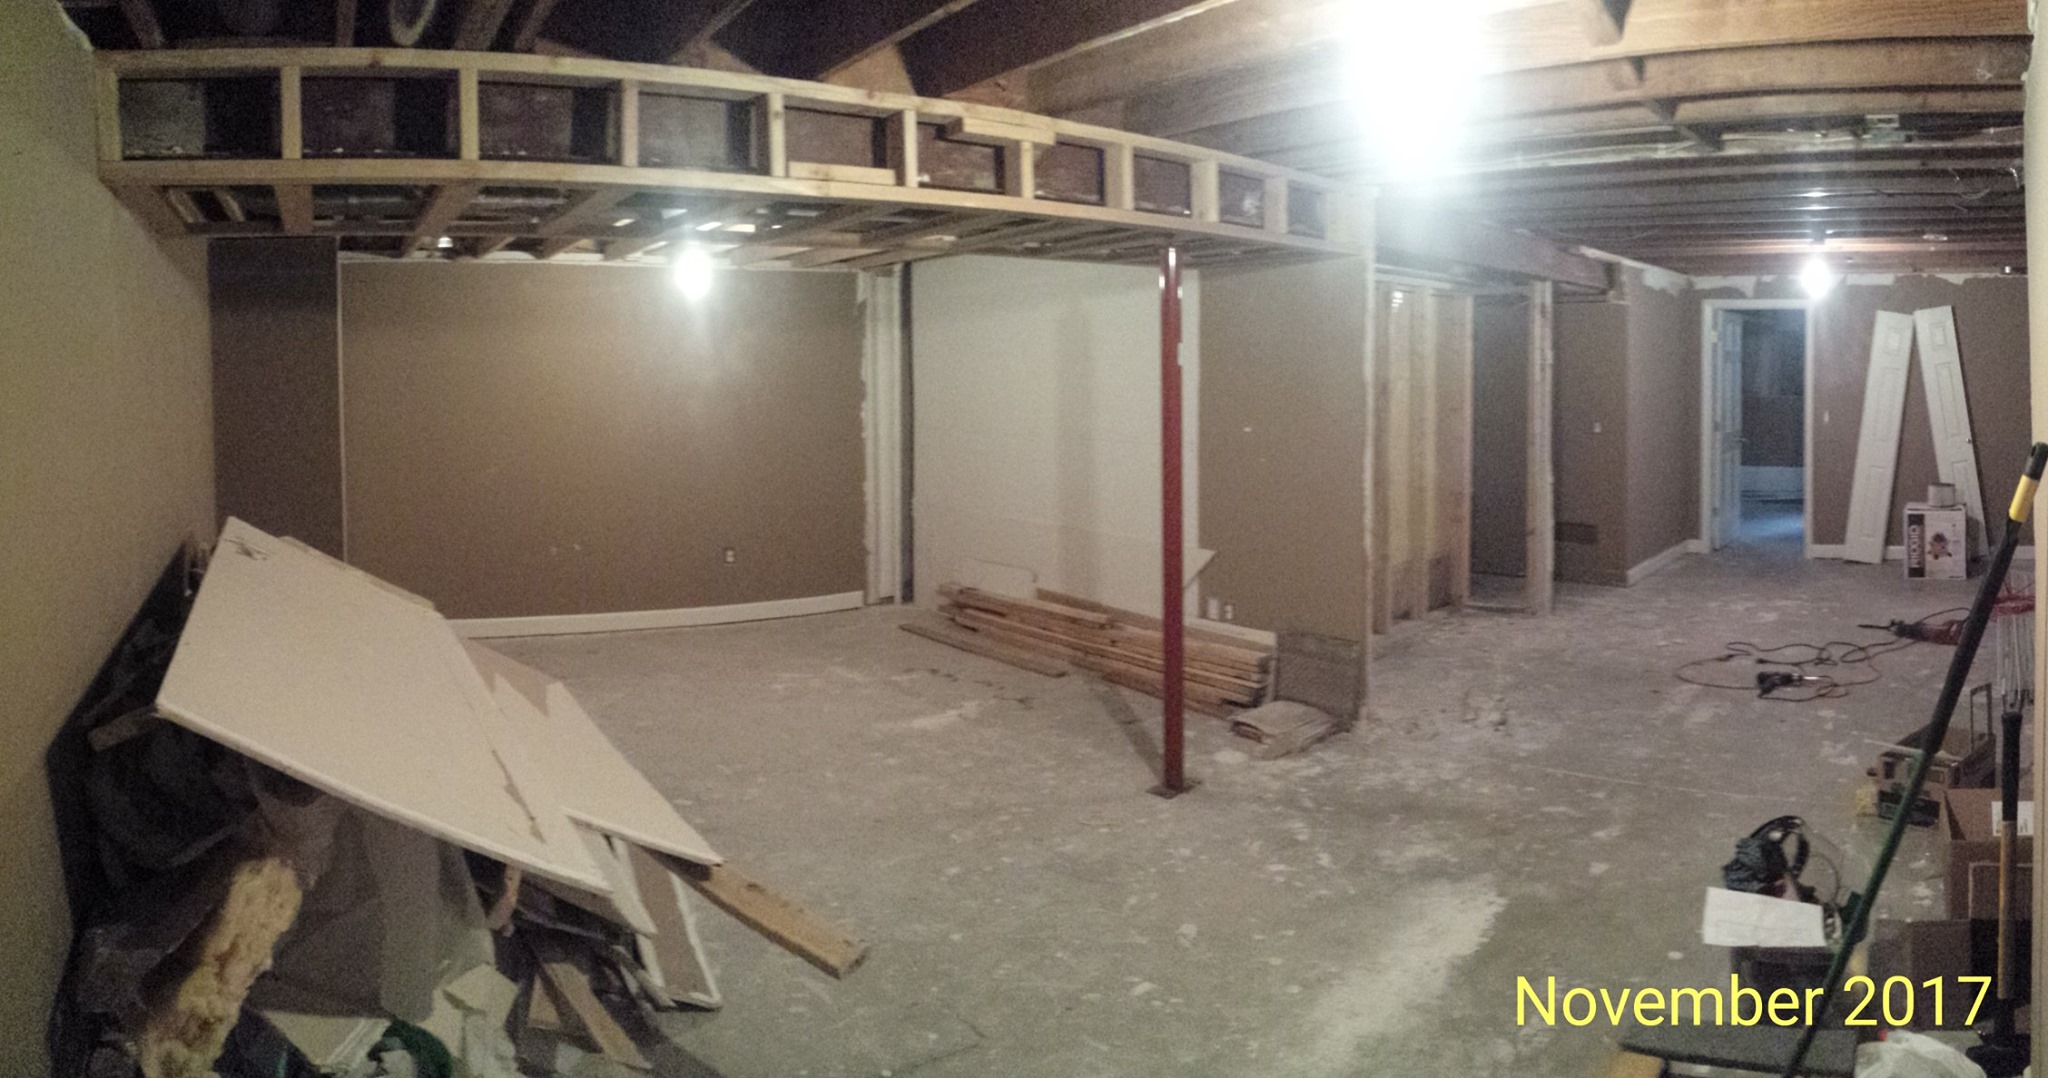 A finished basement undergoing demolition as seen in this photo dated November 2017.